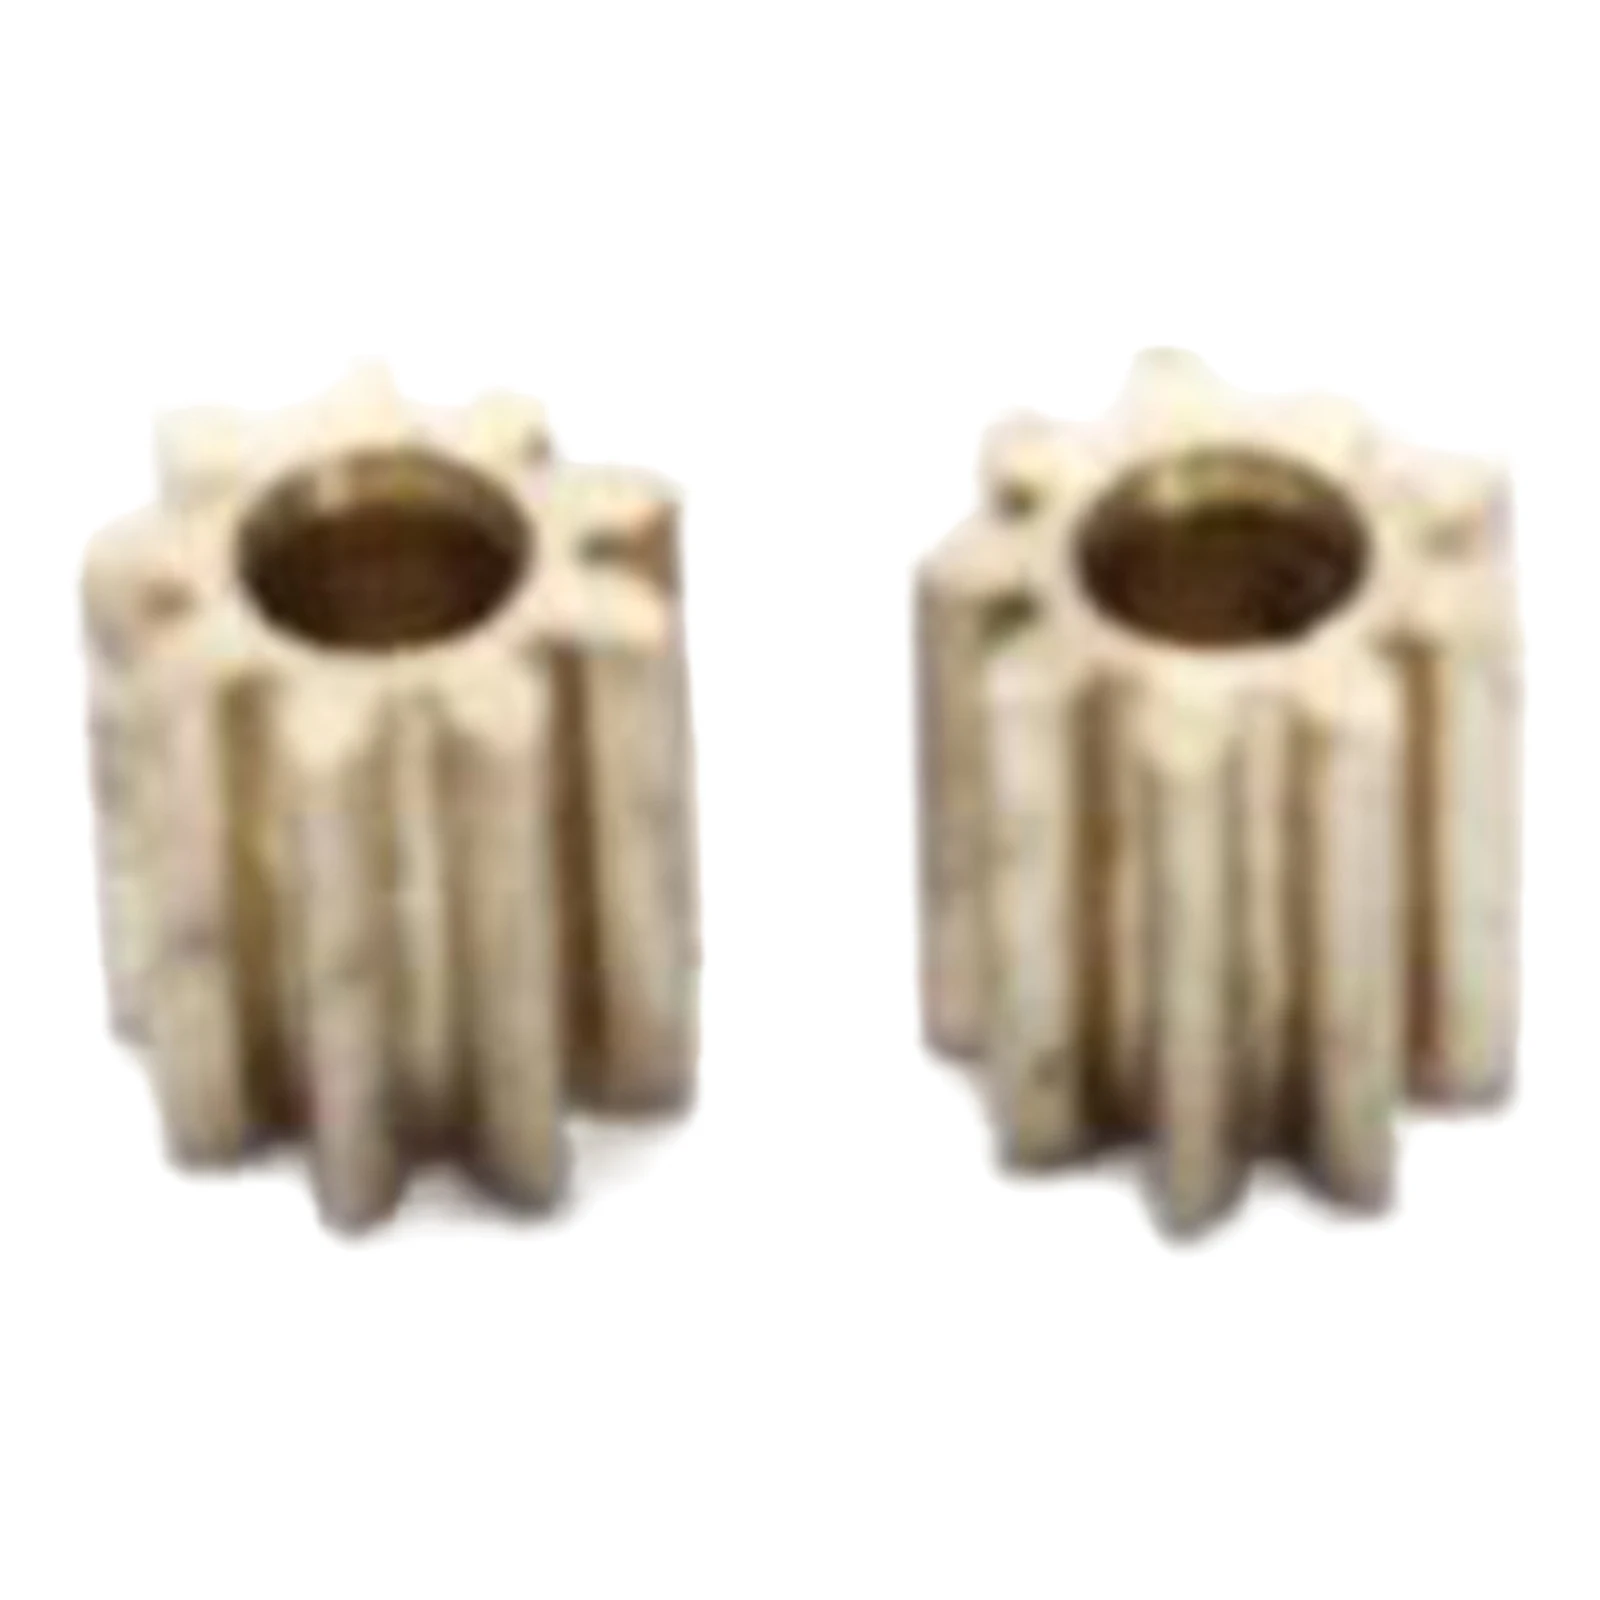 2x Motor Pinion Gear Set, Durable Brass, Fit for Module 0.4 9 ,  Replacement